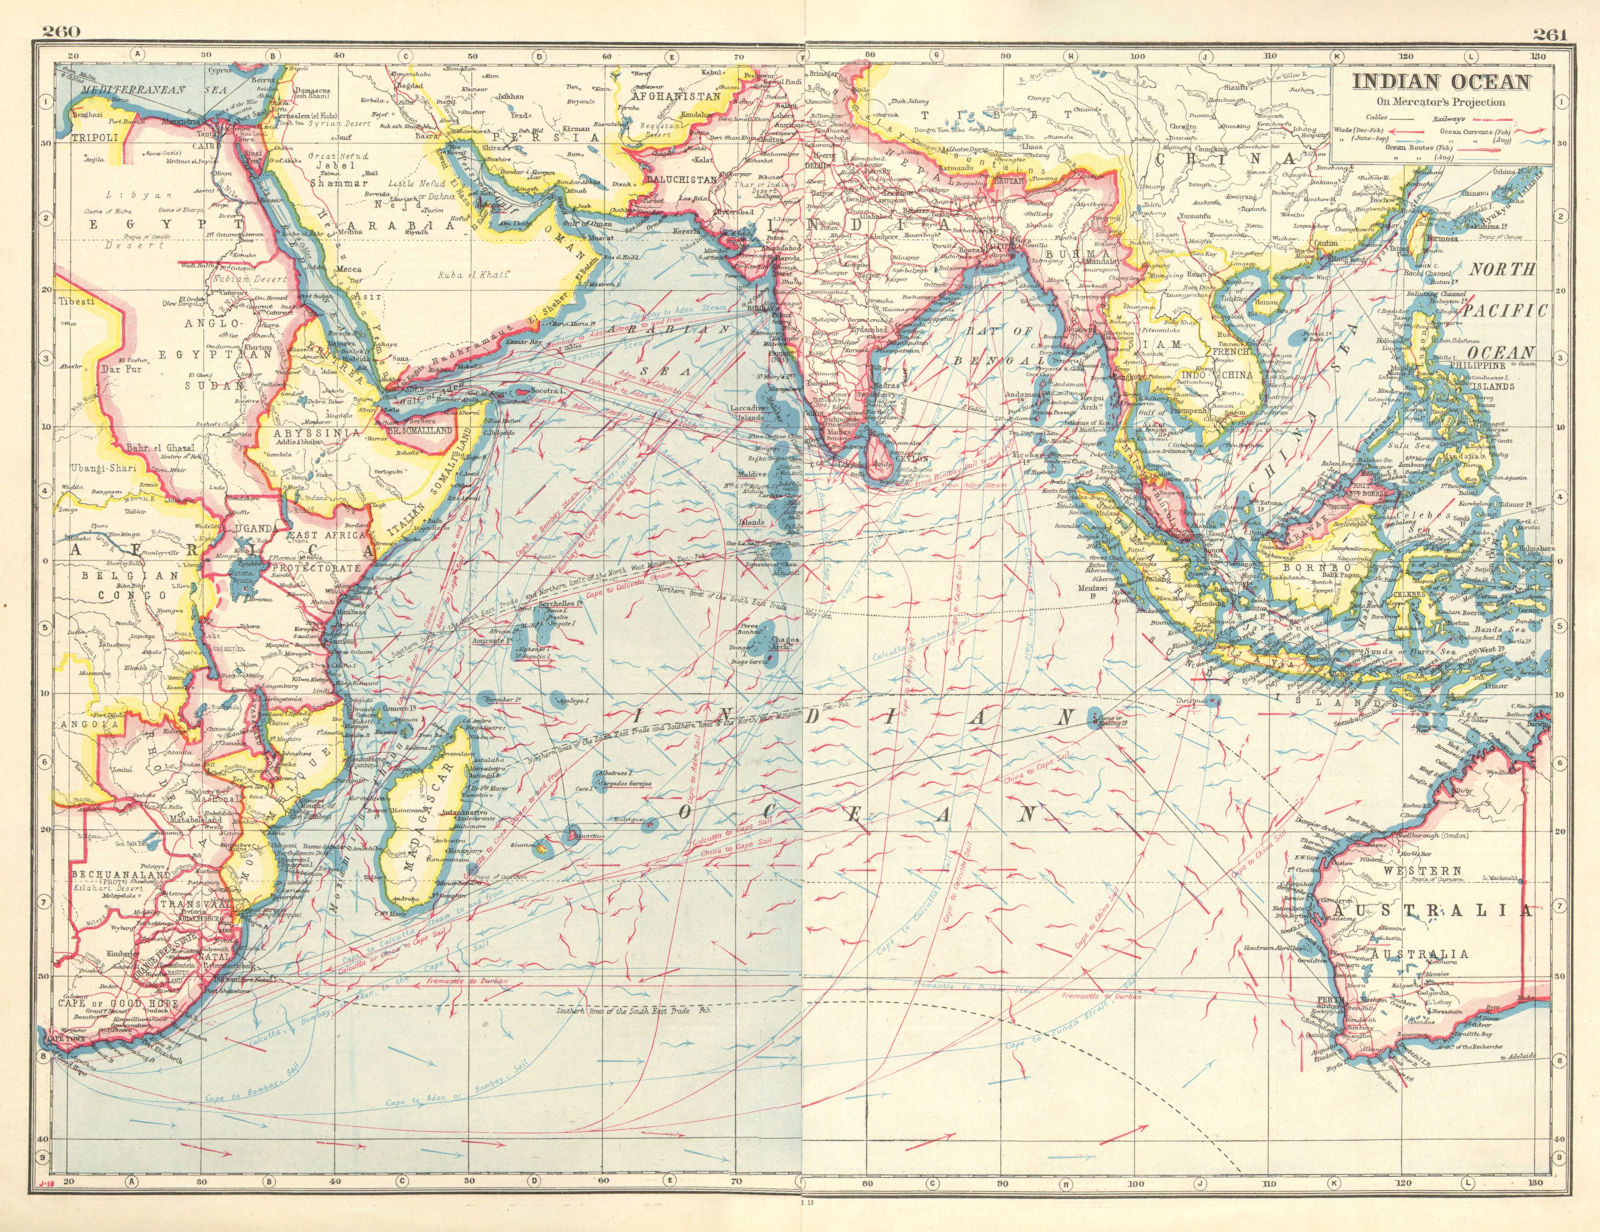 INDIAN OCEAN. British colonies/Empire. Winds currents Steamship routes 1920 map